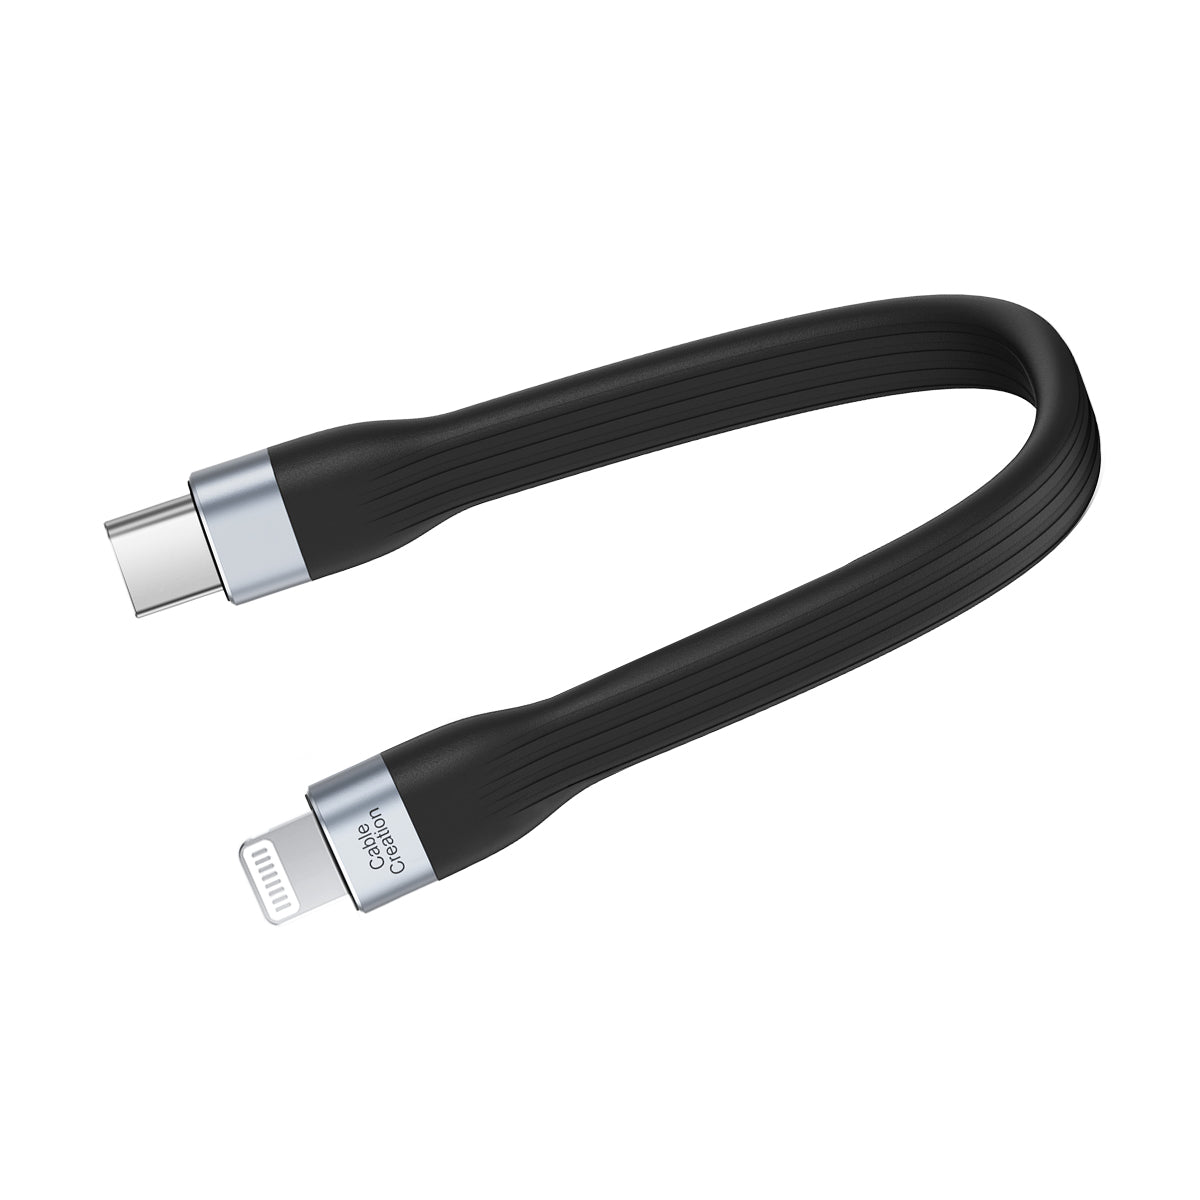 Short Lightning USB C Charger Cable | CableCreation